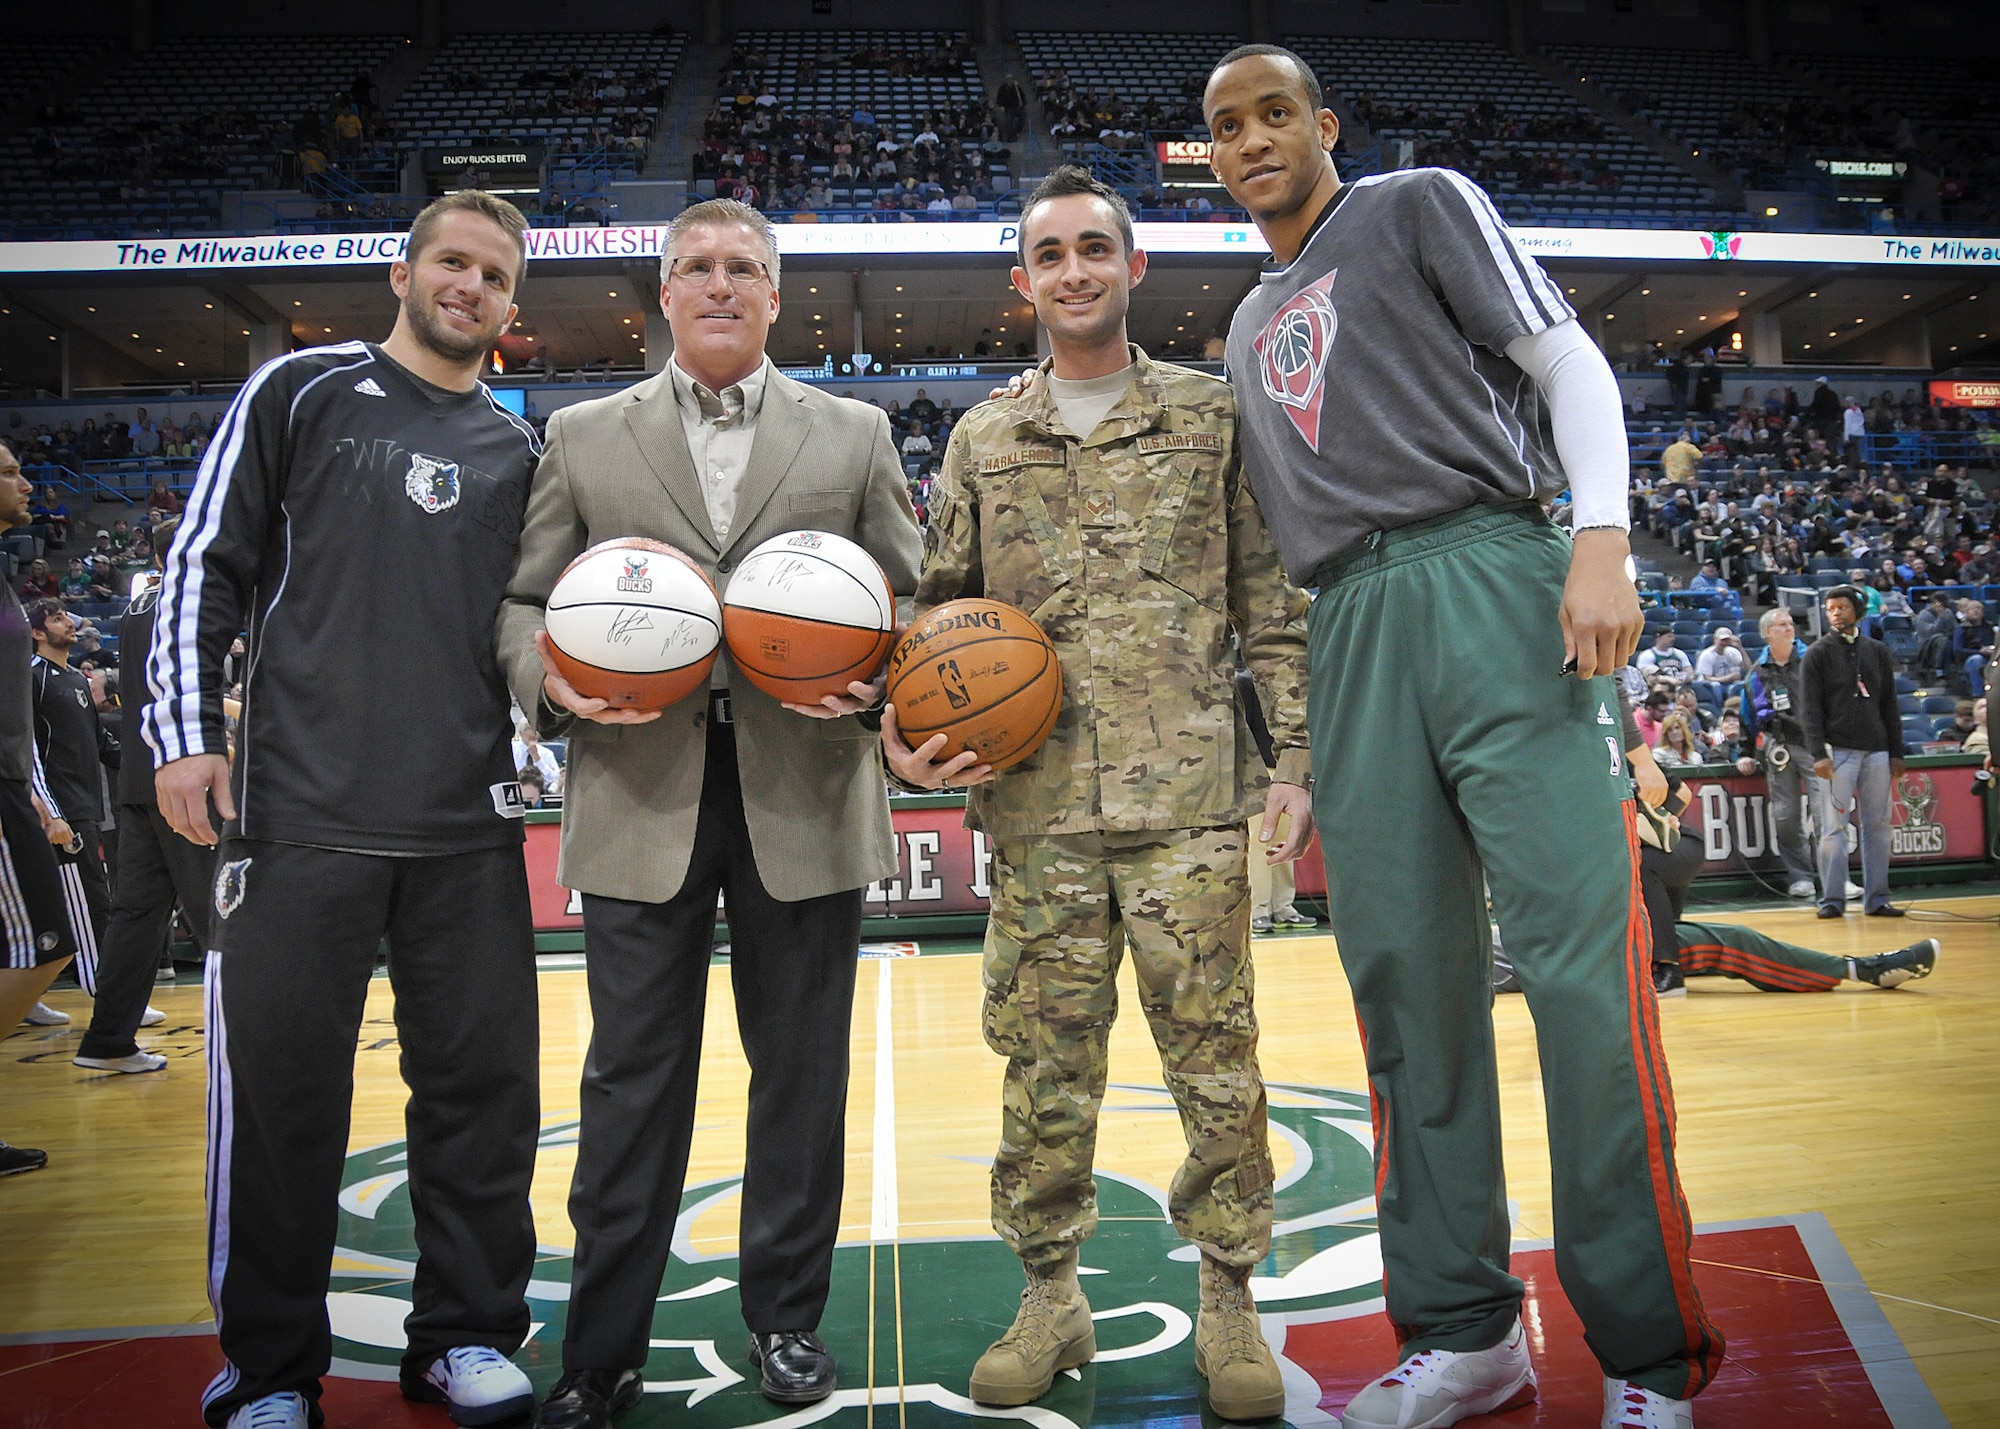 Senior Airman Jefferson Harkleroad poses for photographers with Minnesota Timberwolves team captain Jose Barea, Michael Steger of Waukesha Metal Products and Milwaukee Bucks team captain Monta Ellis at center court of the BMO Harris Bradley Center in Milwaukee Wed., April 3, 2013. (Air National Guard Photo by 1st Lt. Nathan Wallin / Released)